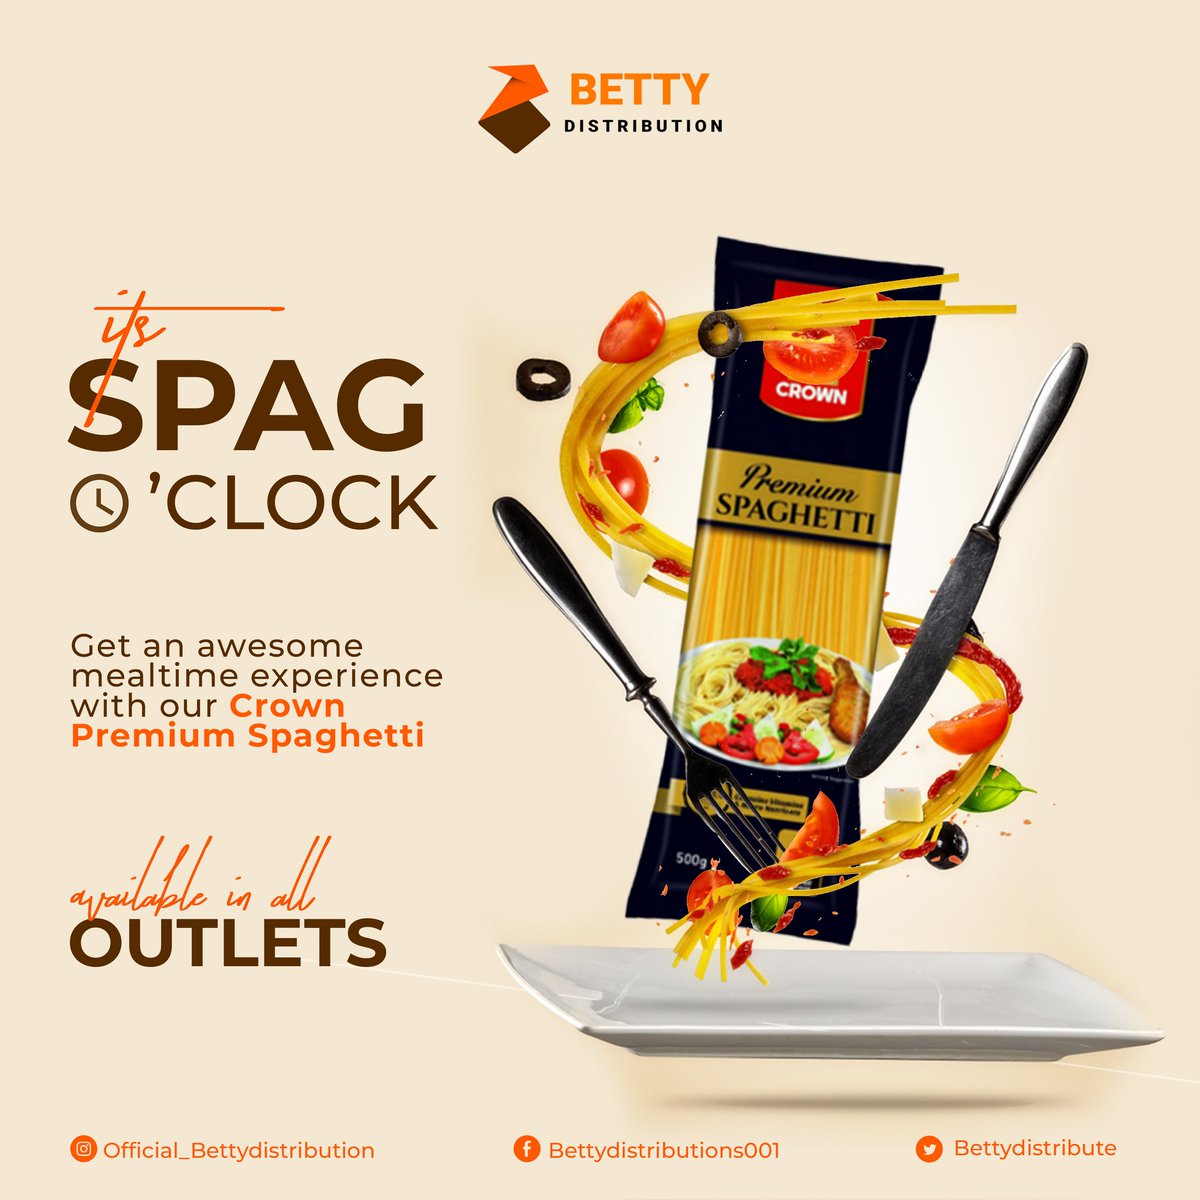 When hunger strikes, it says 'it's time for some delicious spaghetti'. Get a premium dining experience with Crown Premium Spaghetti, available in all our outlets. Place your order today via DM or +2349018236310.
.
.
.

.
#nigerianfood #foodie #naijafood #abuja #lagos #Naijachoice